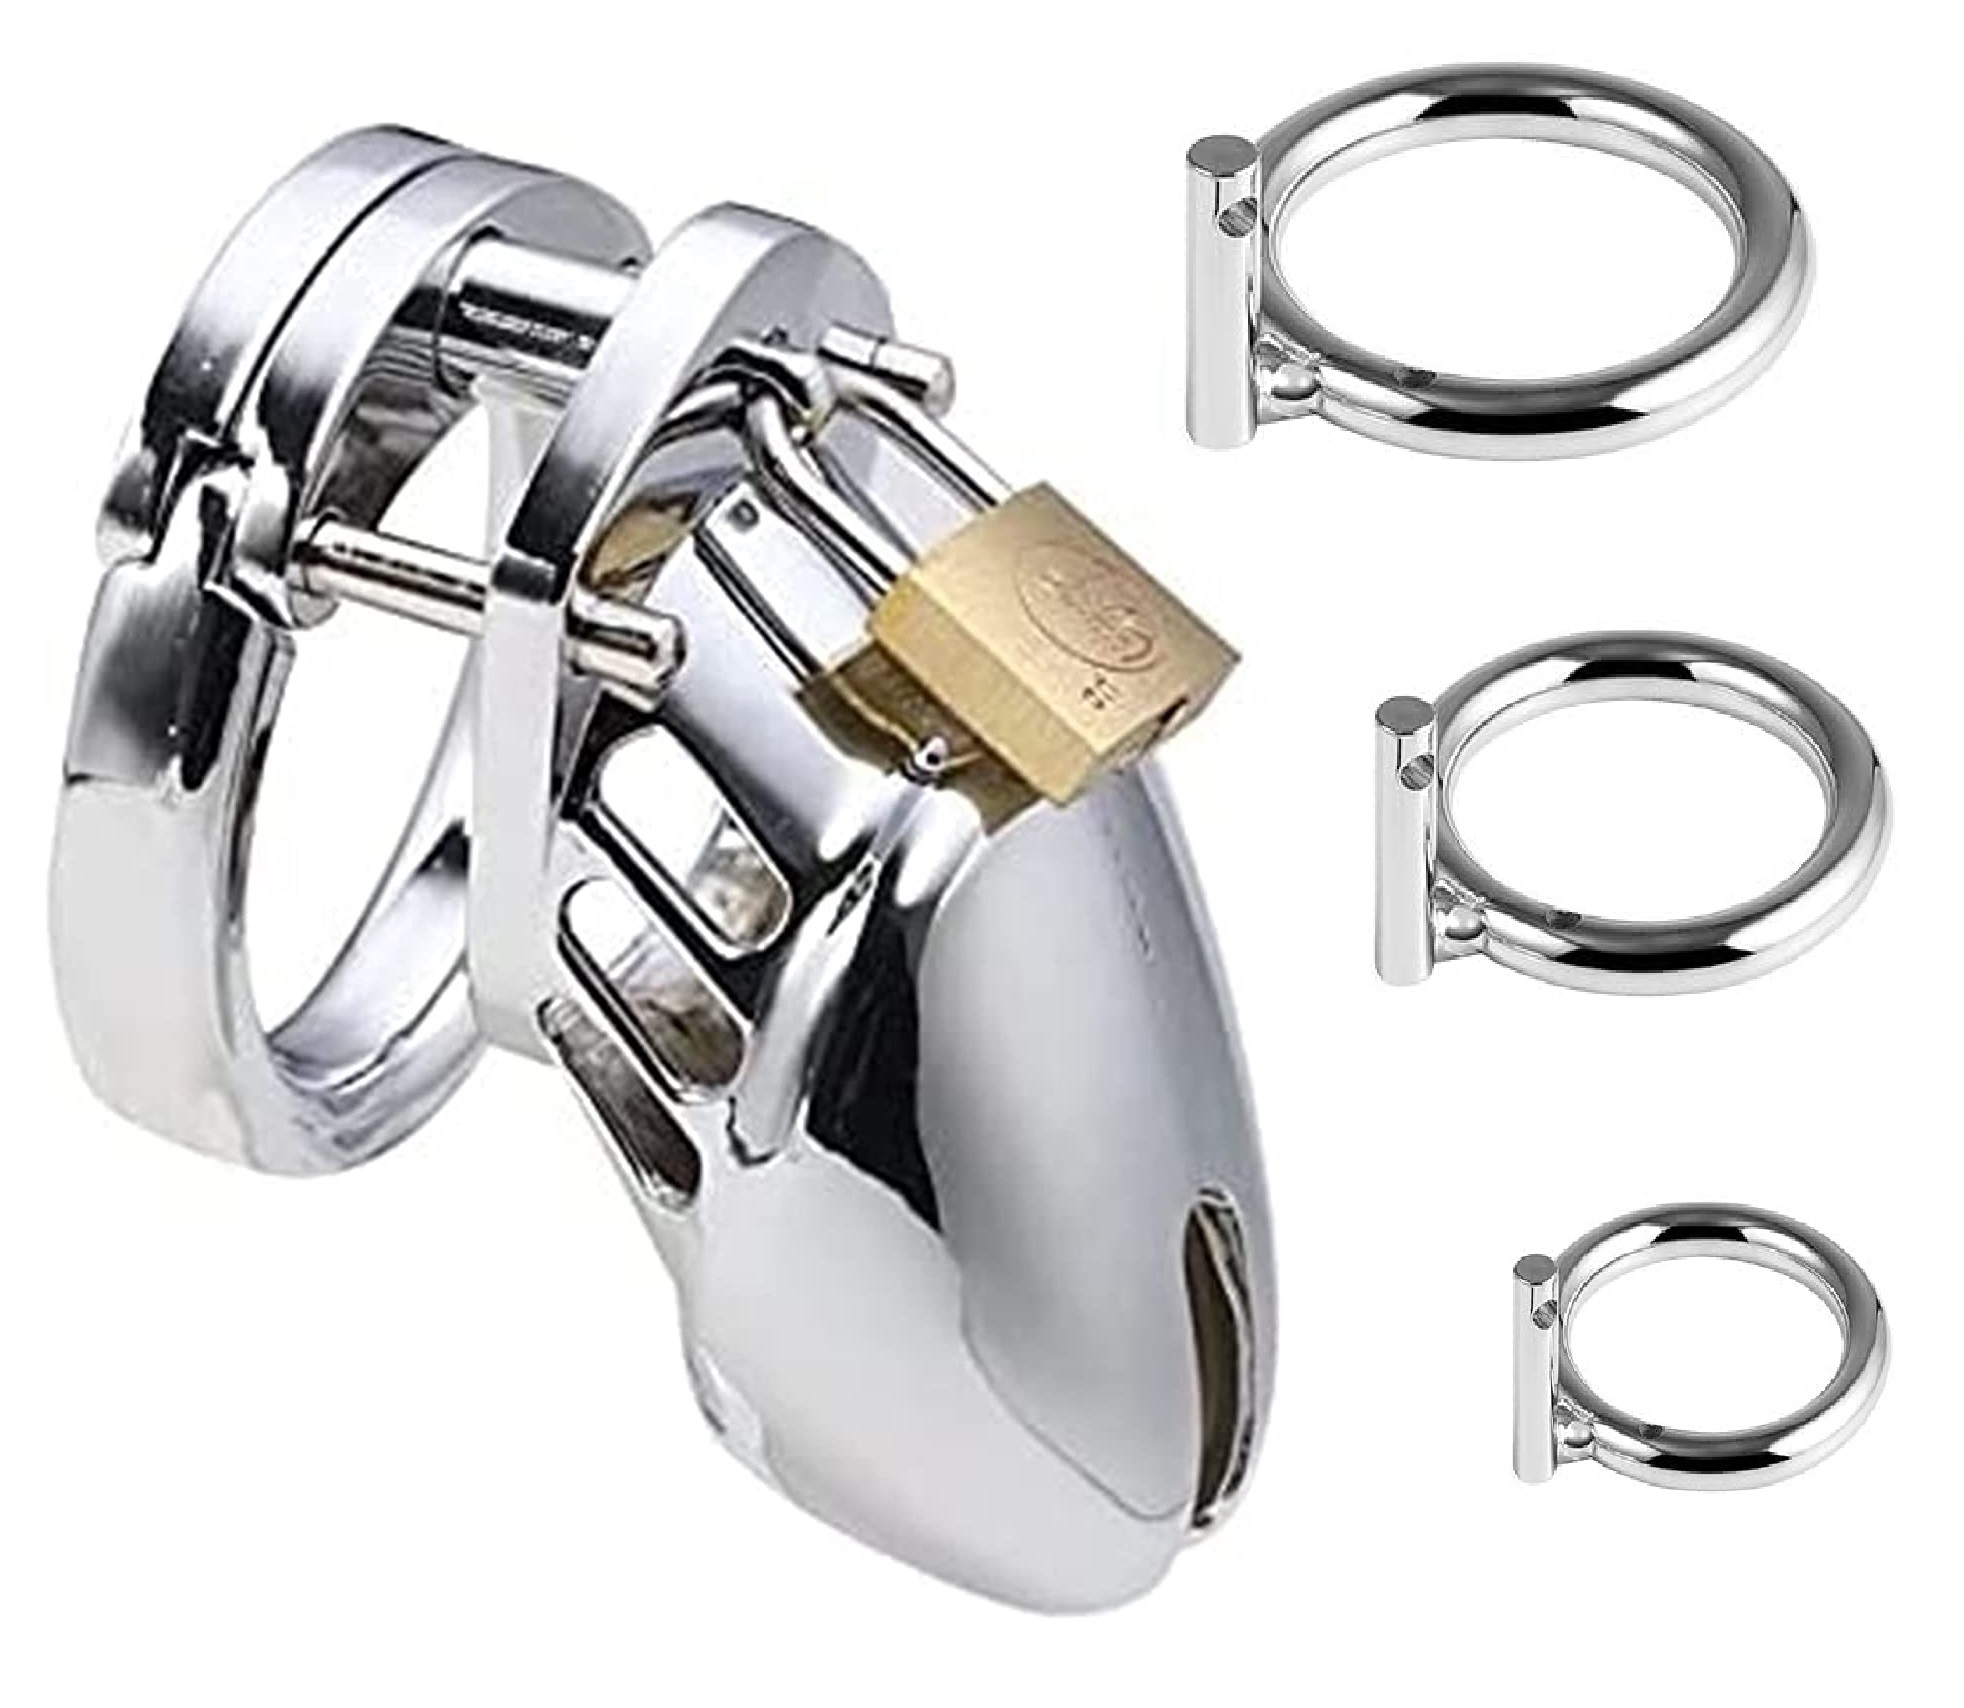 Male Chastity Device Cock Cage - Average Size Chastity Cage with 3 Active Rings & Keys Adult Sex Toy for Men Penis Exercise (Silvery)